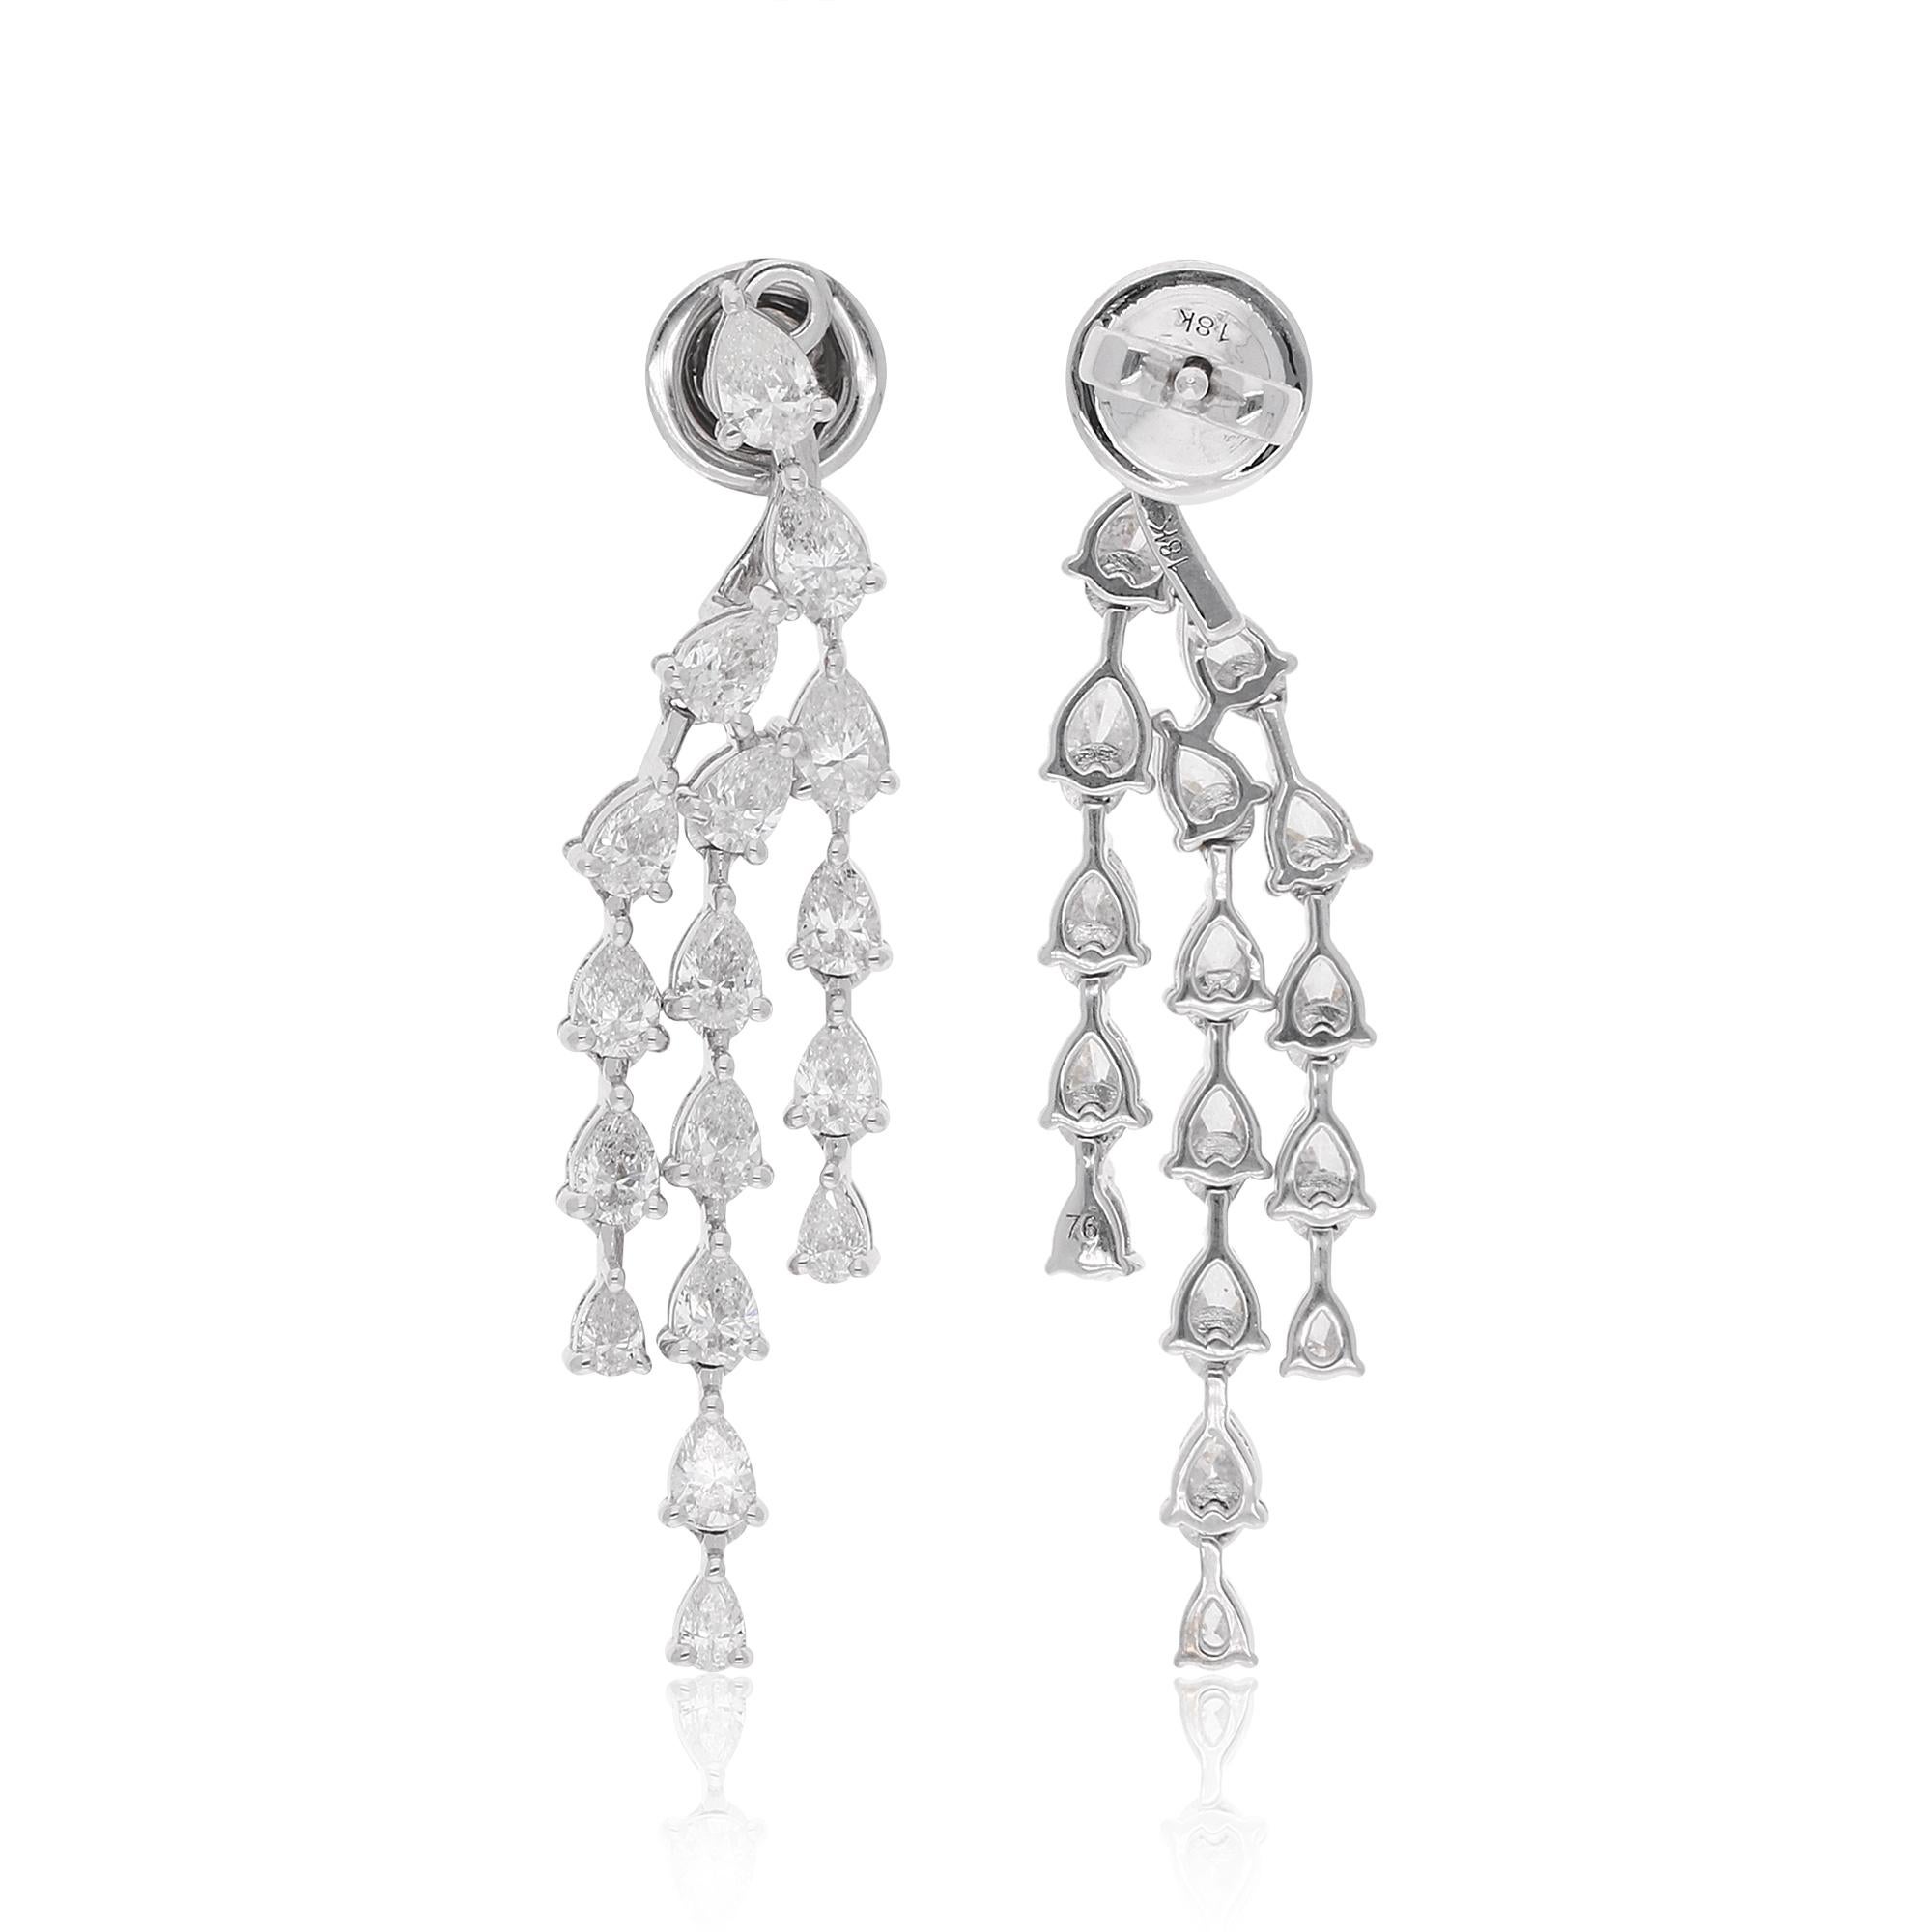 Make a captivating statement on your special day with these exquisite Wedding Ear Jacket Earrings. Designed to elevate your bridal ensemble, these earrings combine classic sophistication with a modern twist.

These are a perfect Gift for Mom,